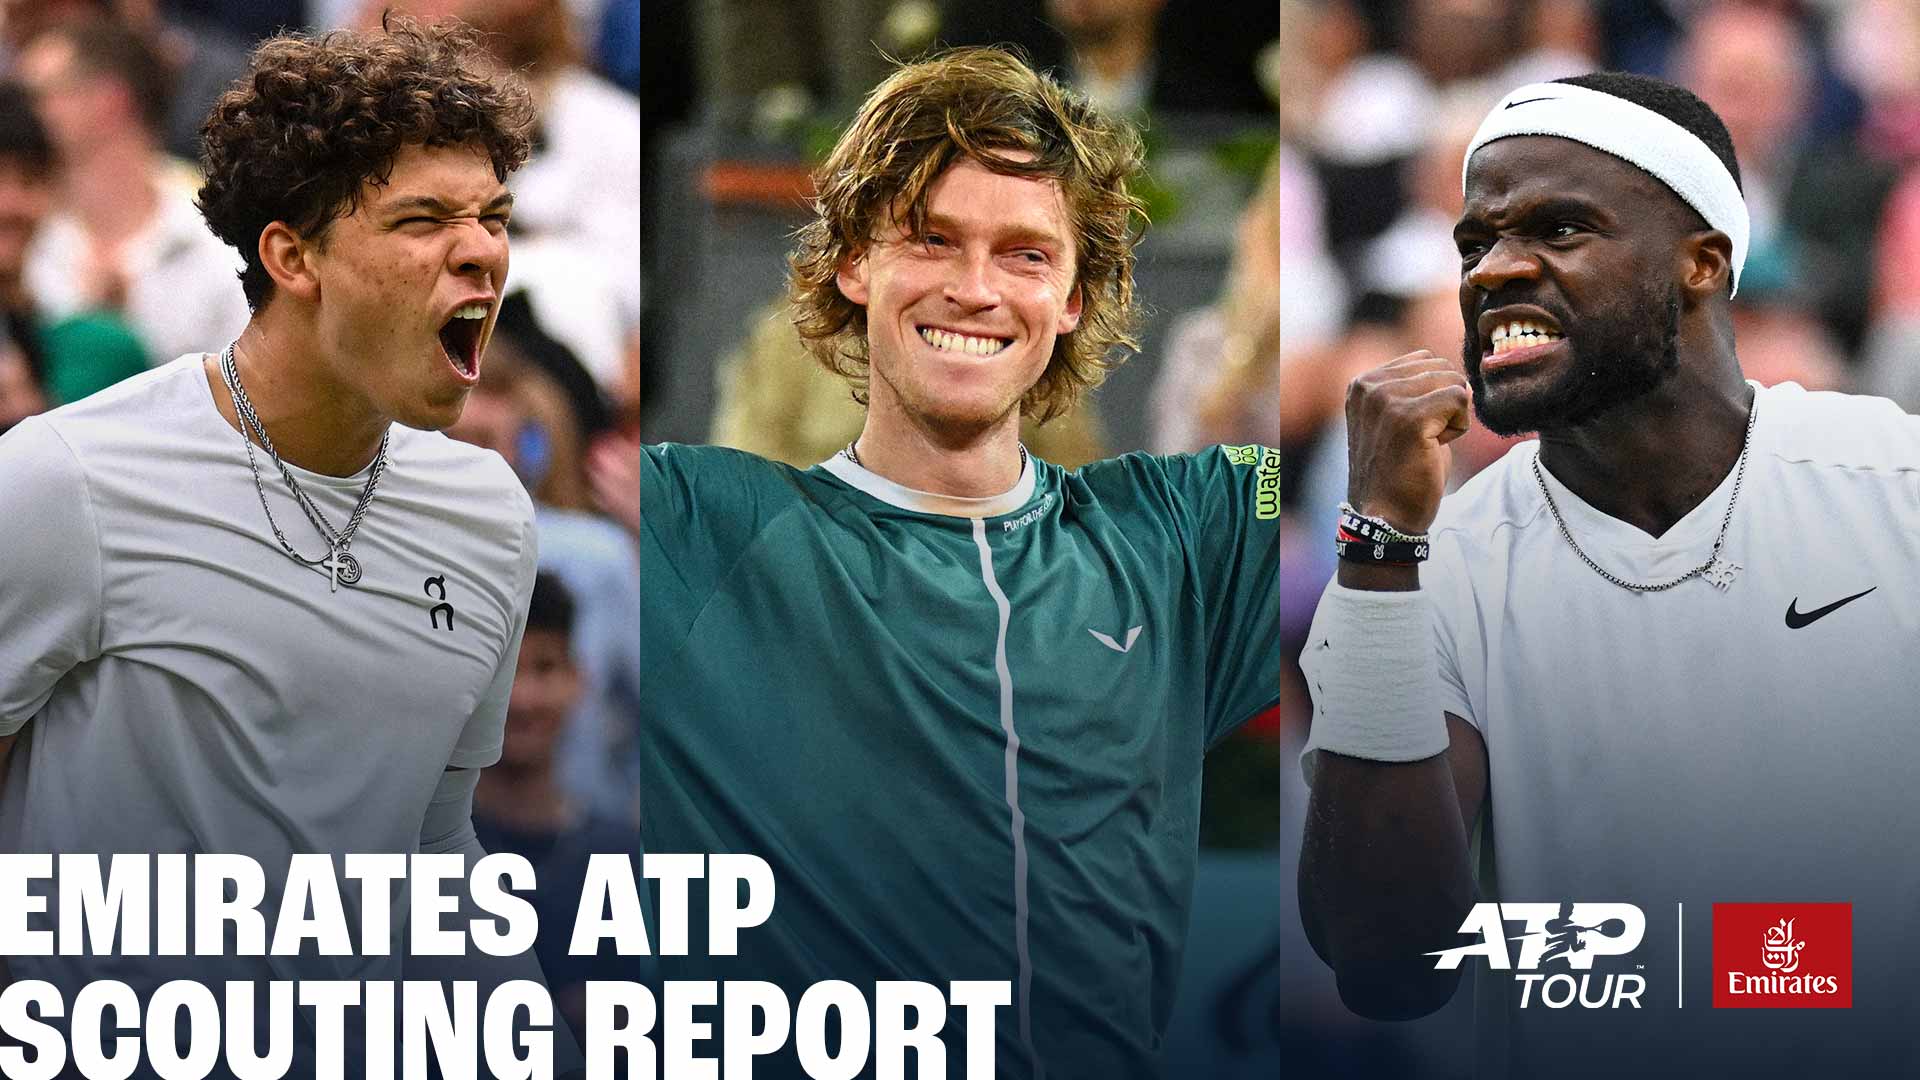 Ben Shelton, Andrey Rublev and Frances Tiafoe will be in action in Washington.